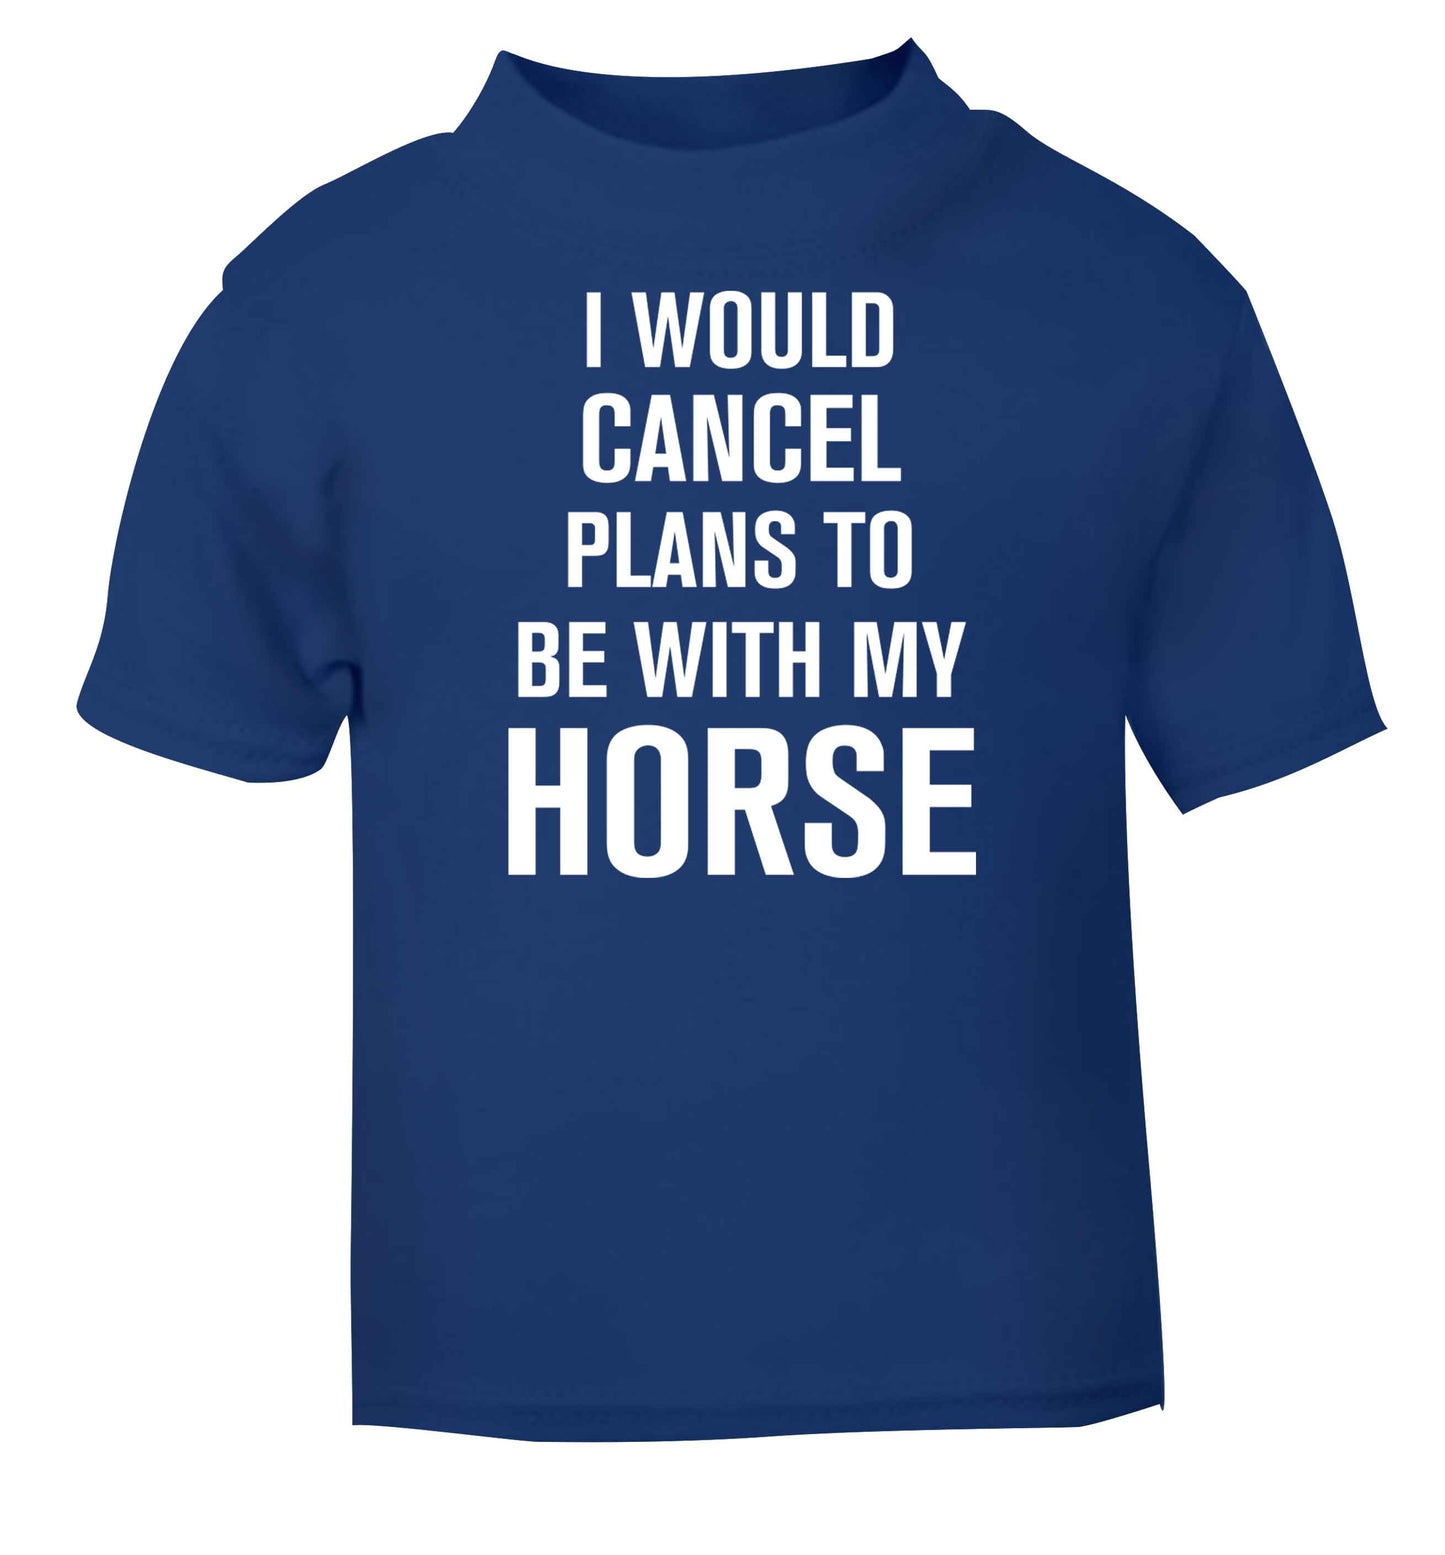 I will cancel plans to be with my horse blue baby toddler Tshirt 2 Years